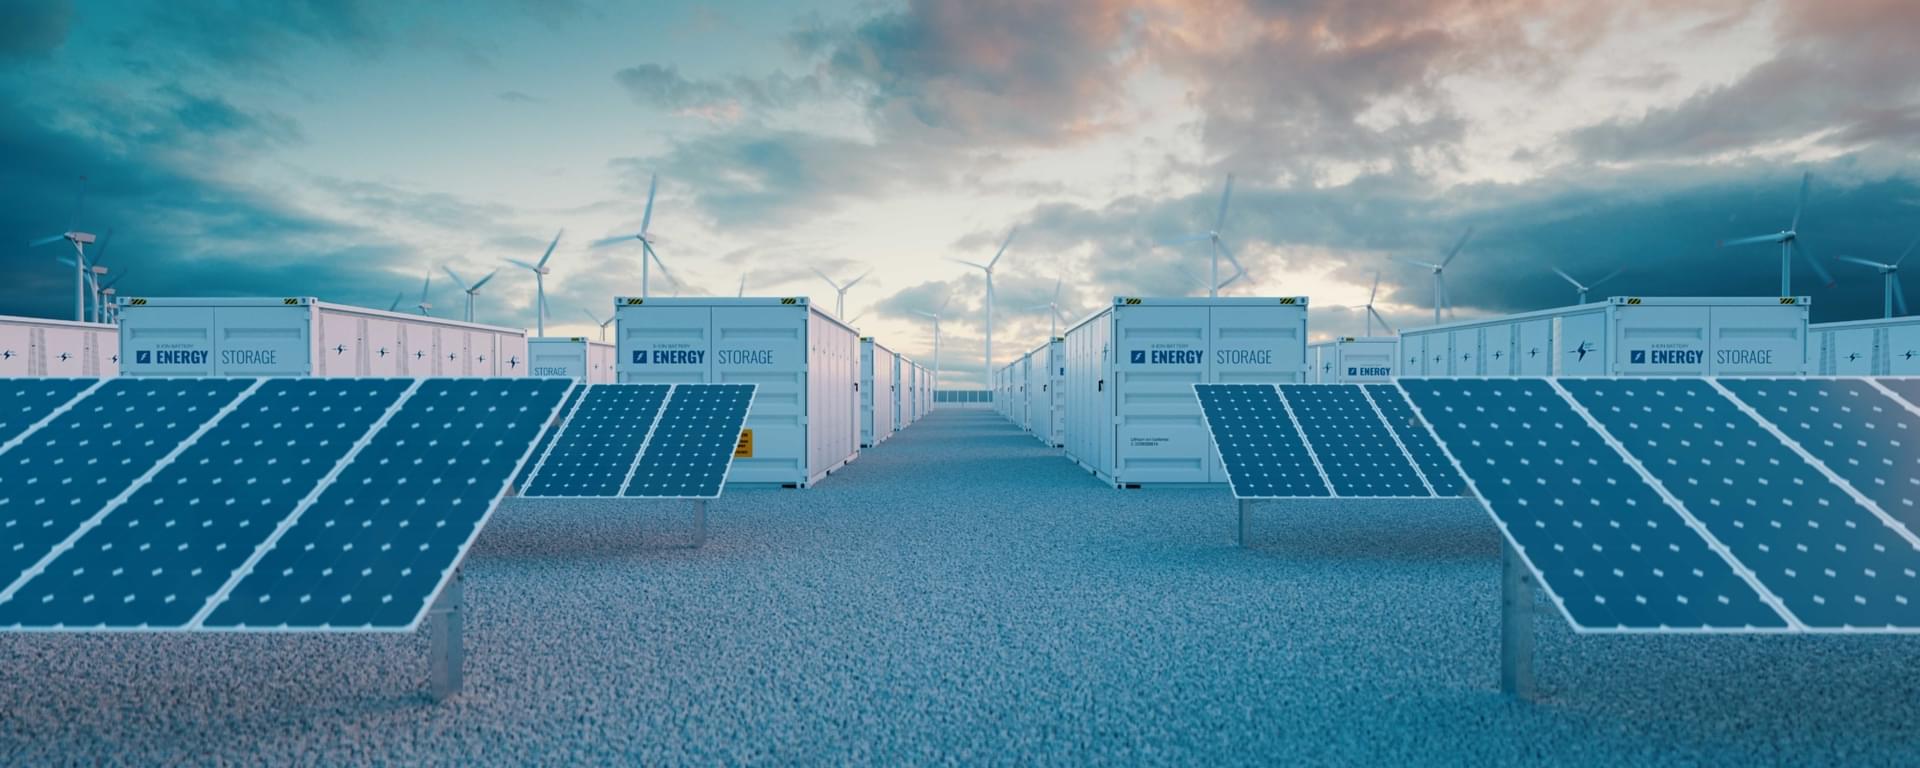 Battery storage power station with solar and wind turbine power plants